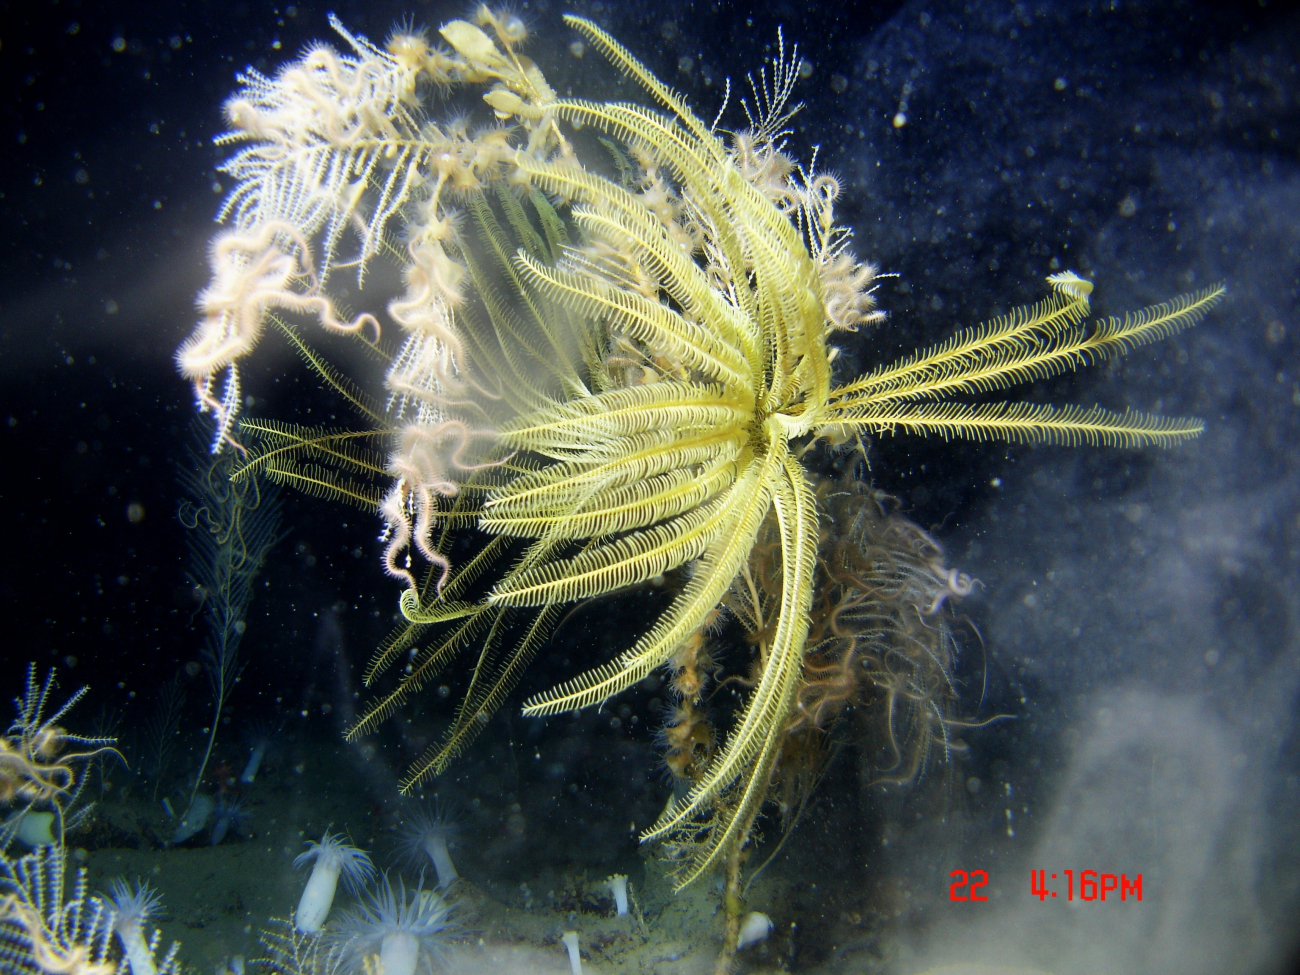 A large yellow feather star crinoid in the foreground, a white coral withnumerous brittle stars, gooseneck barnacles at the top of the image, a numberof large white anemones, zooanthids, and cup corals